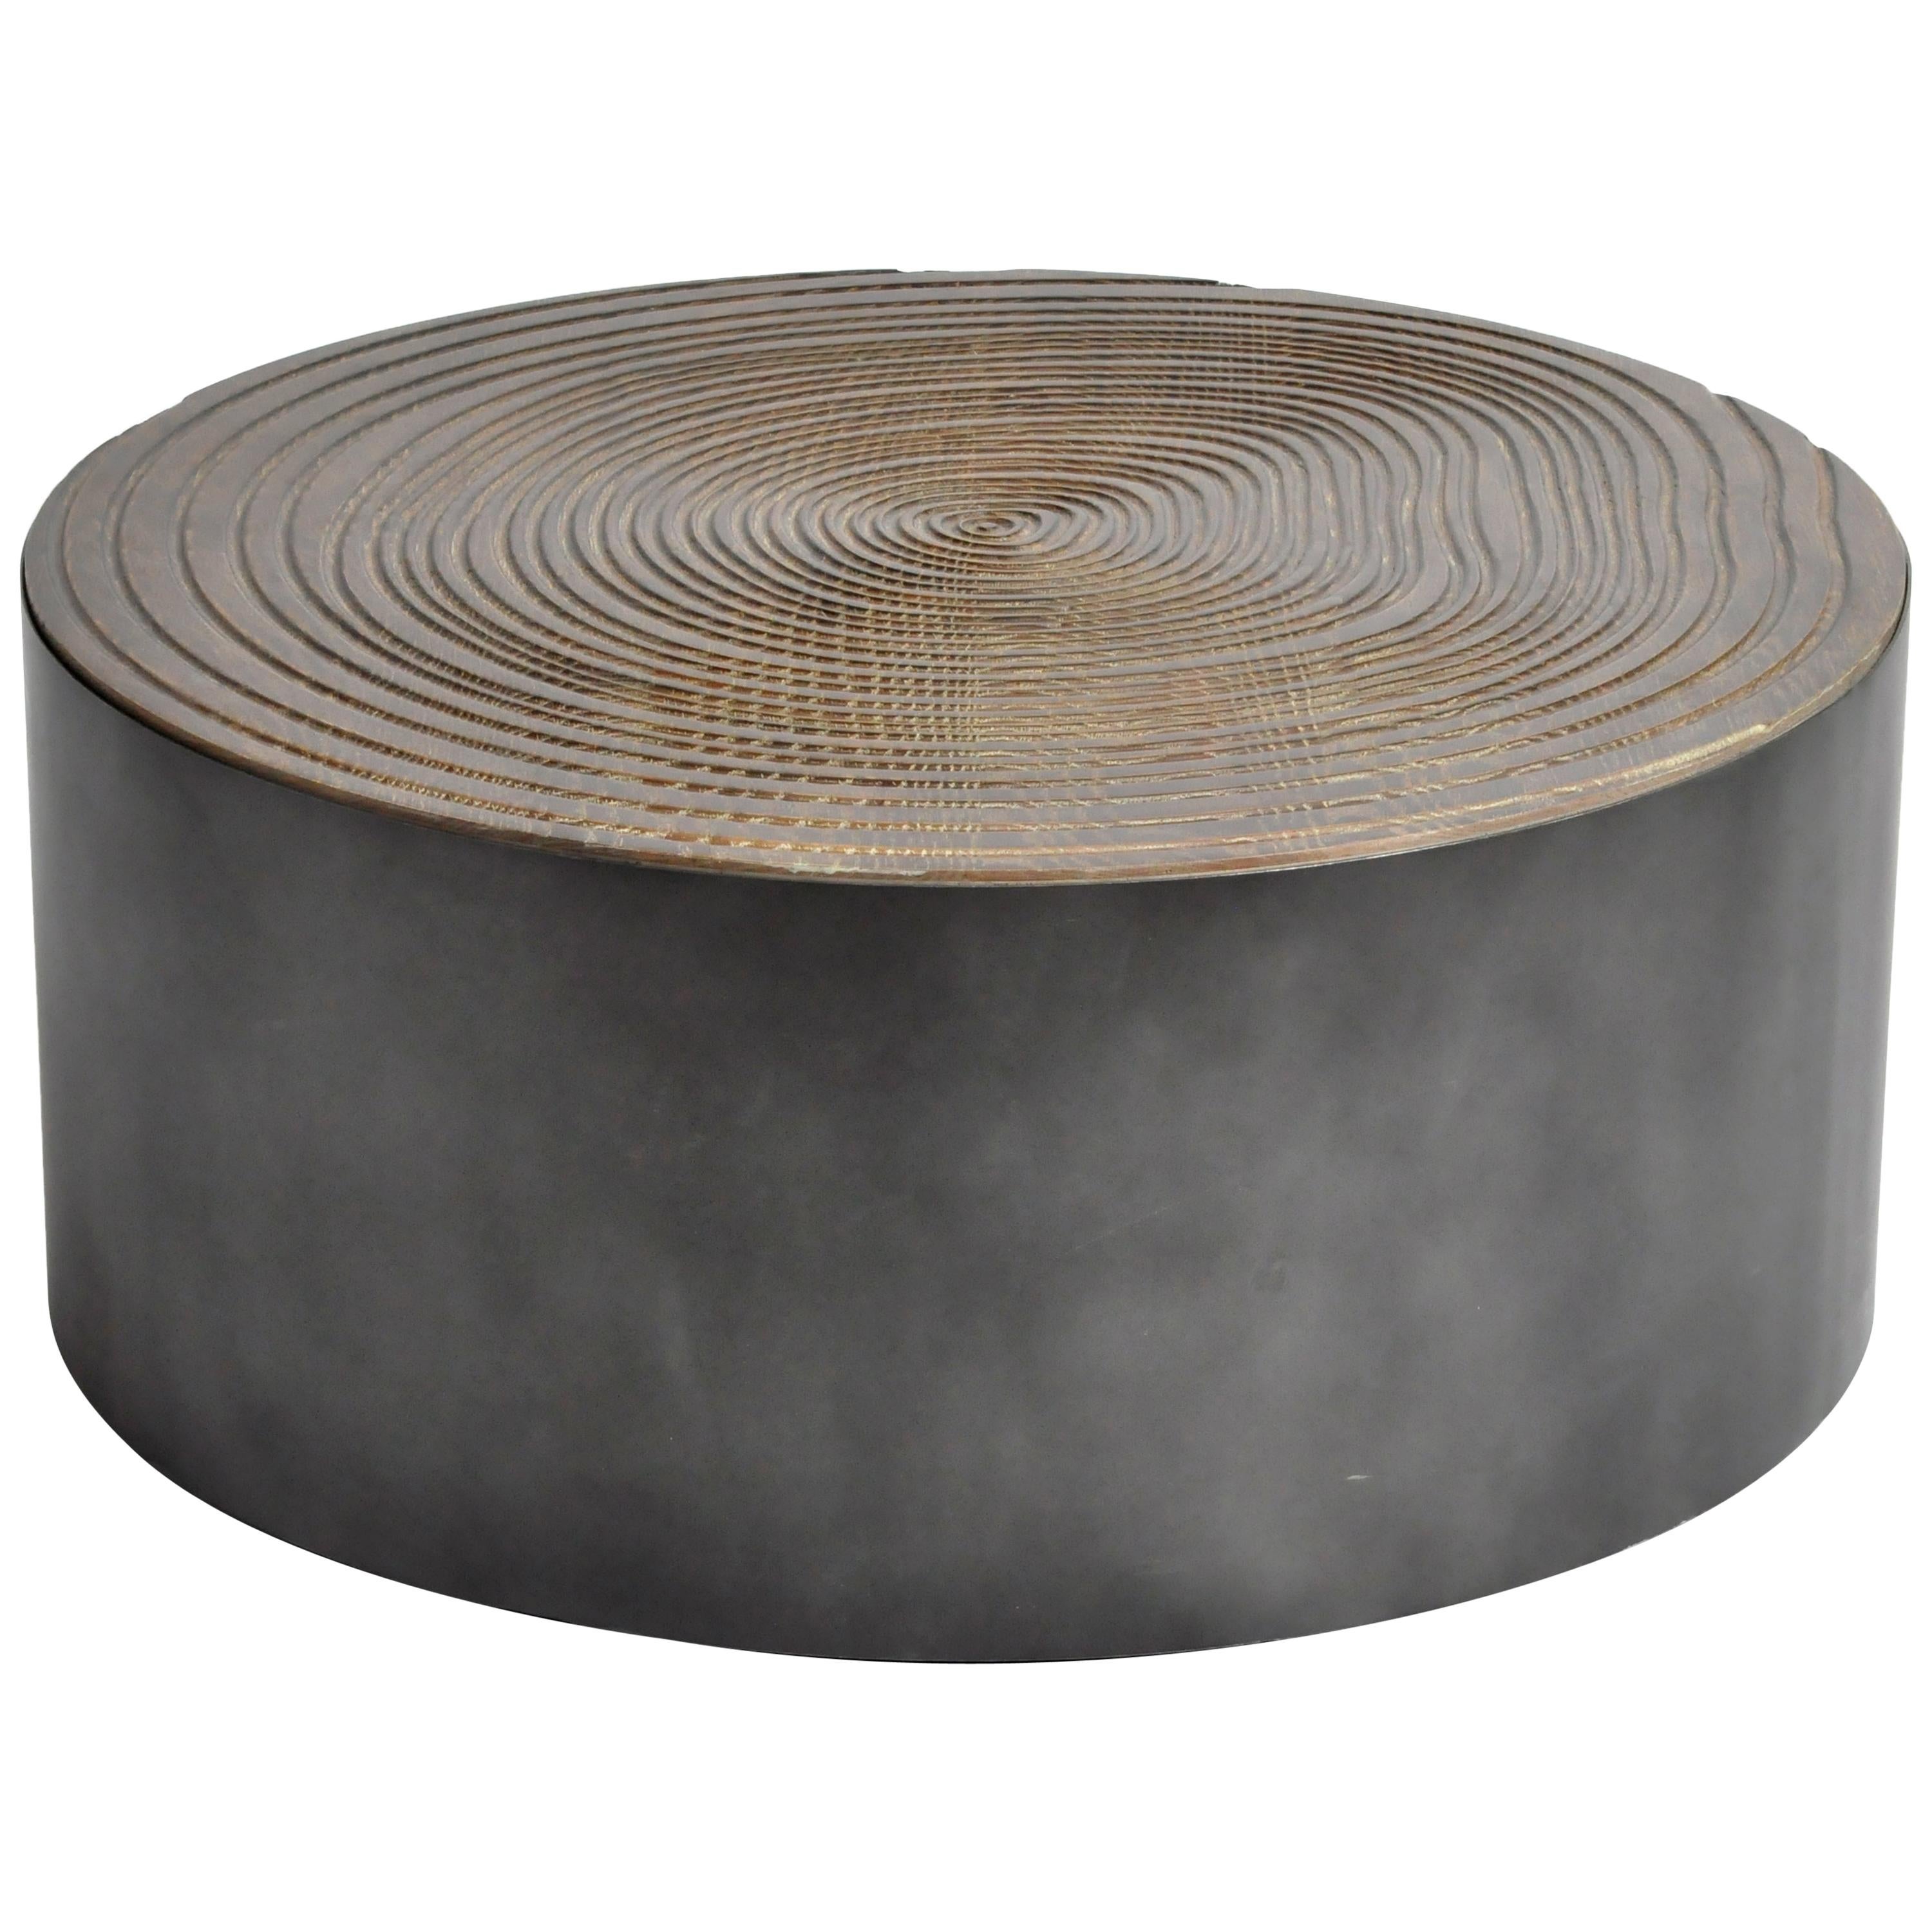 Parisian Round Oakwood Coffee Table with Metal Base